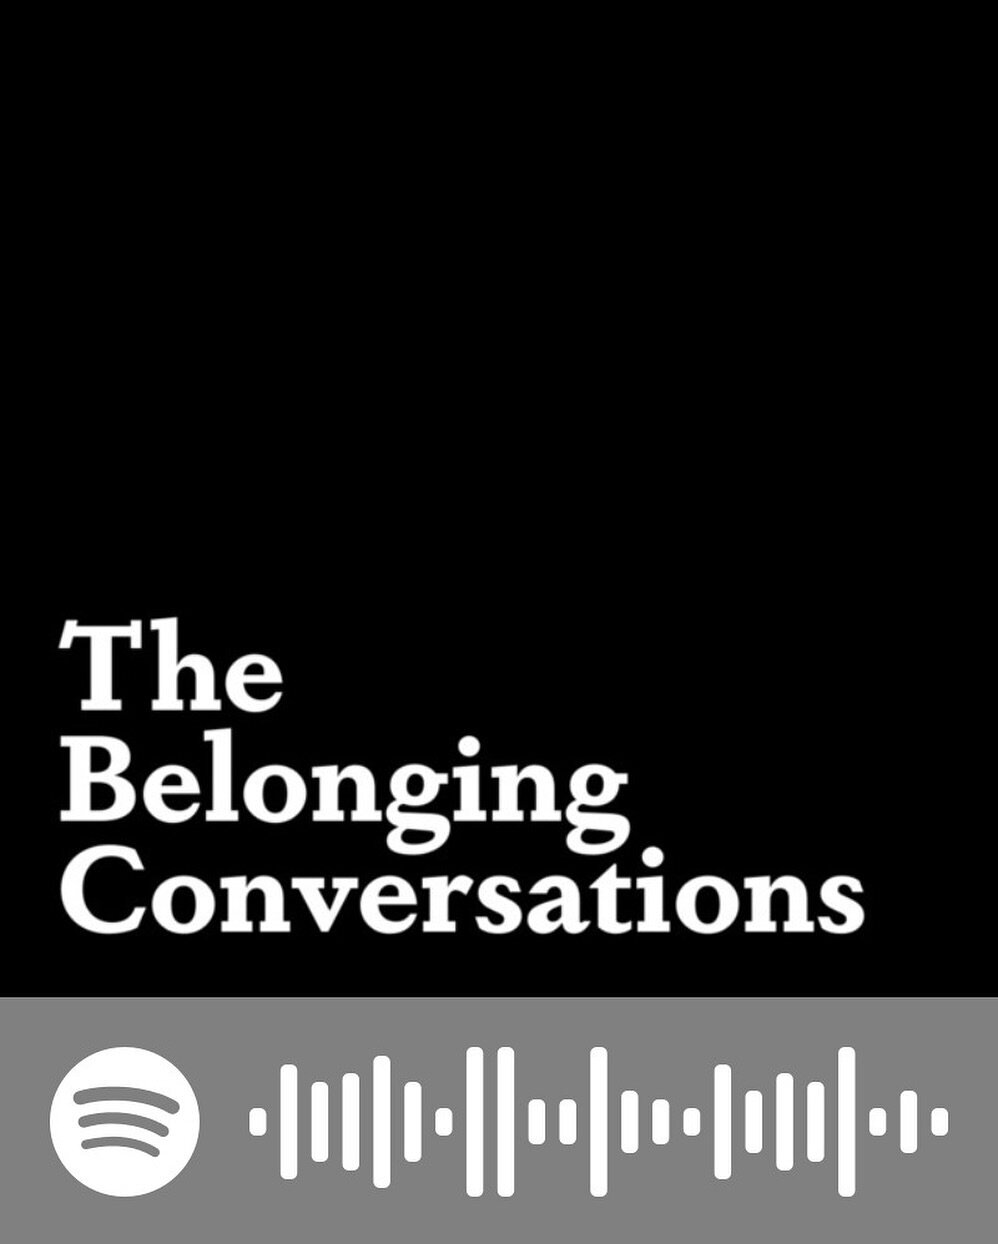 Let&rsquo;s do this.

Introducing The Belonging Conversations Podcast.

This will be a platform to celebrate, educate, and empower. 

Hearing from those that inspire me the most. The people behind the advocacy. 

Not only their work, but what matters